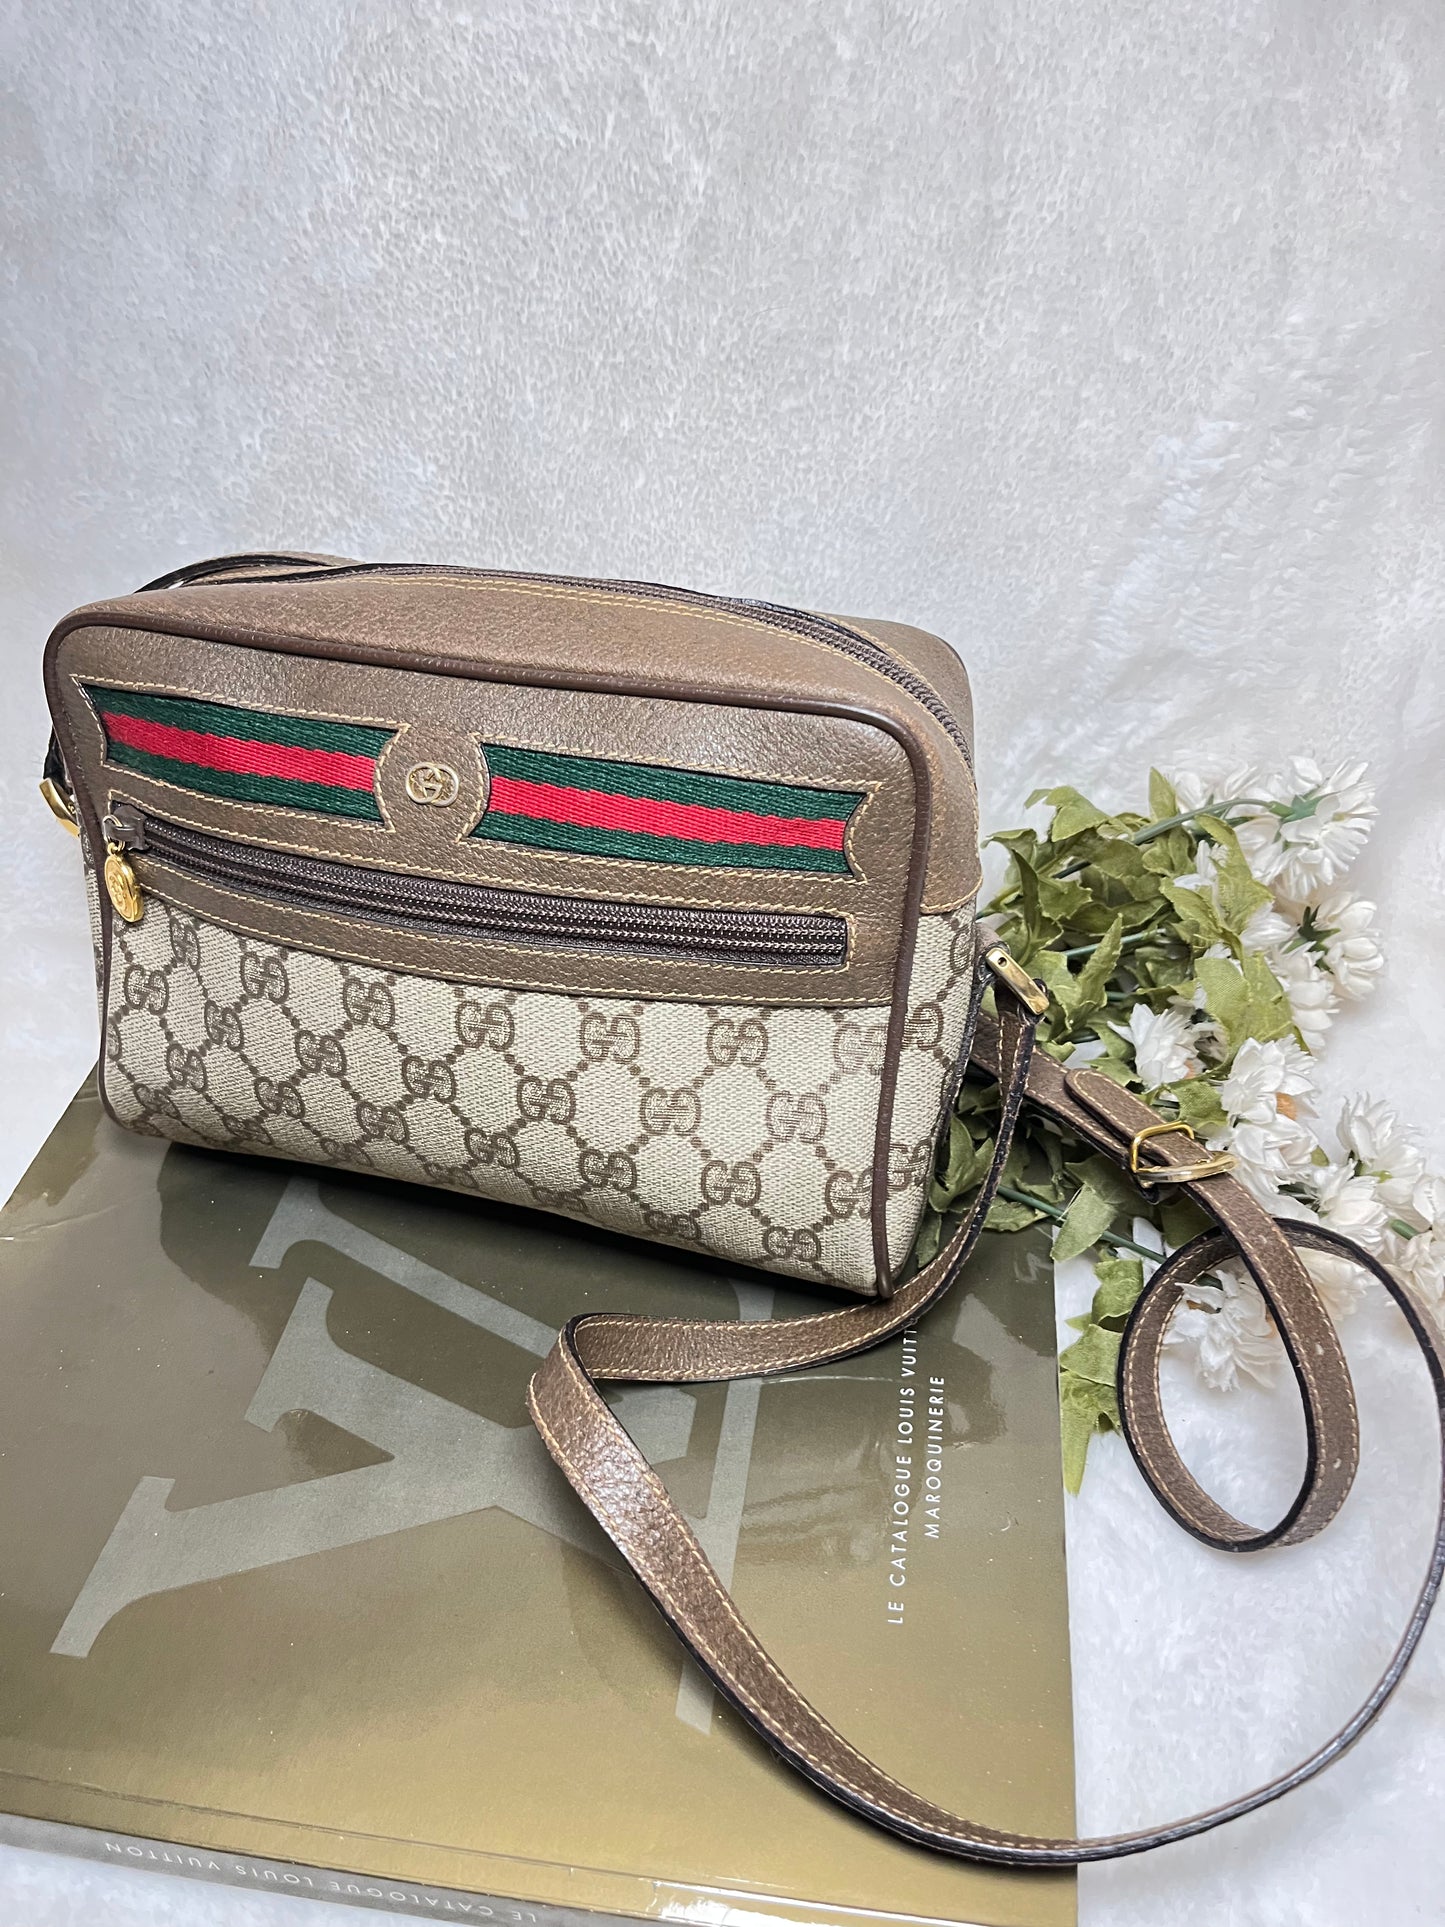 Authentic pre-owned Gucci ophidia sherry line crossbody shoulder bag